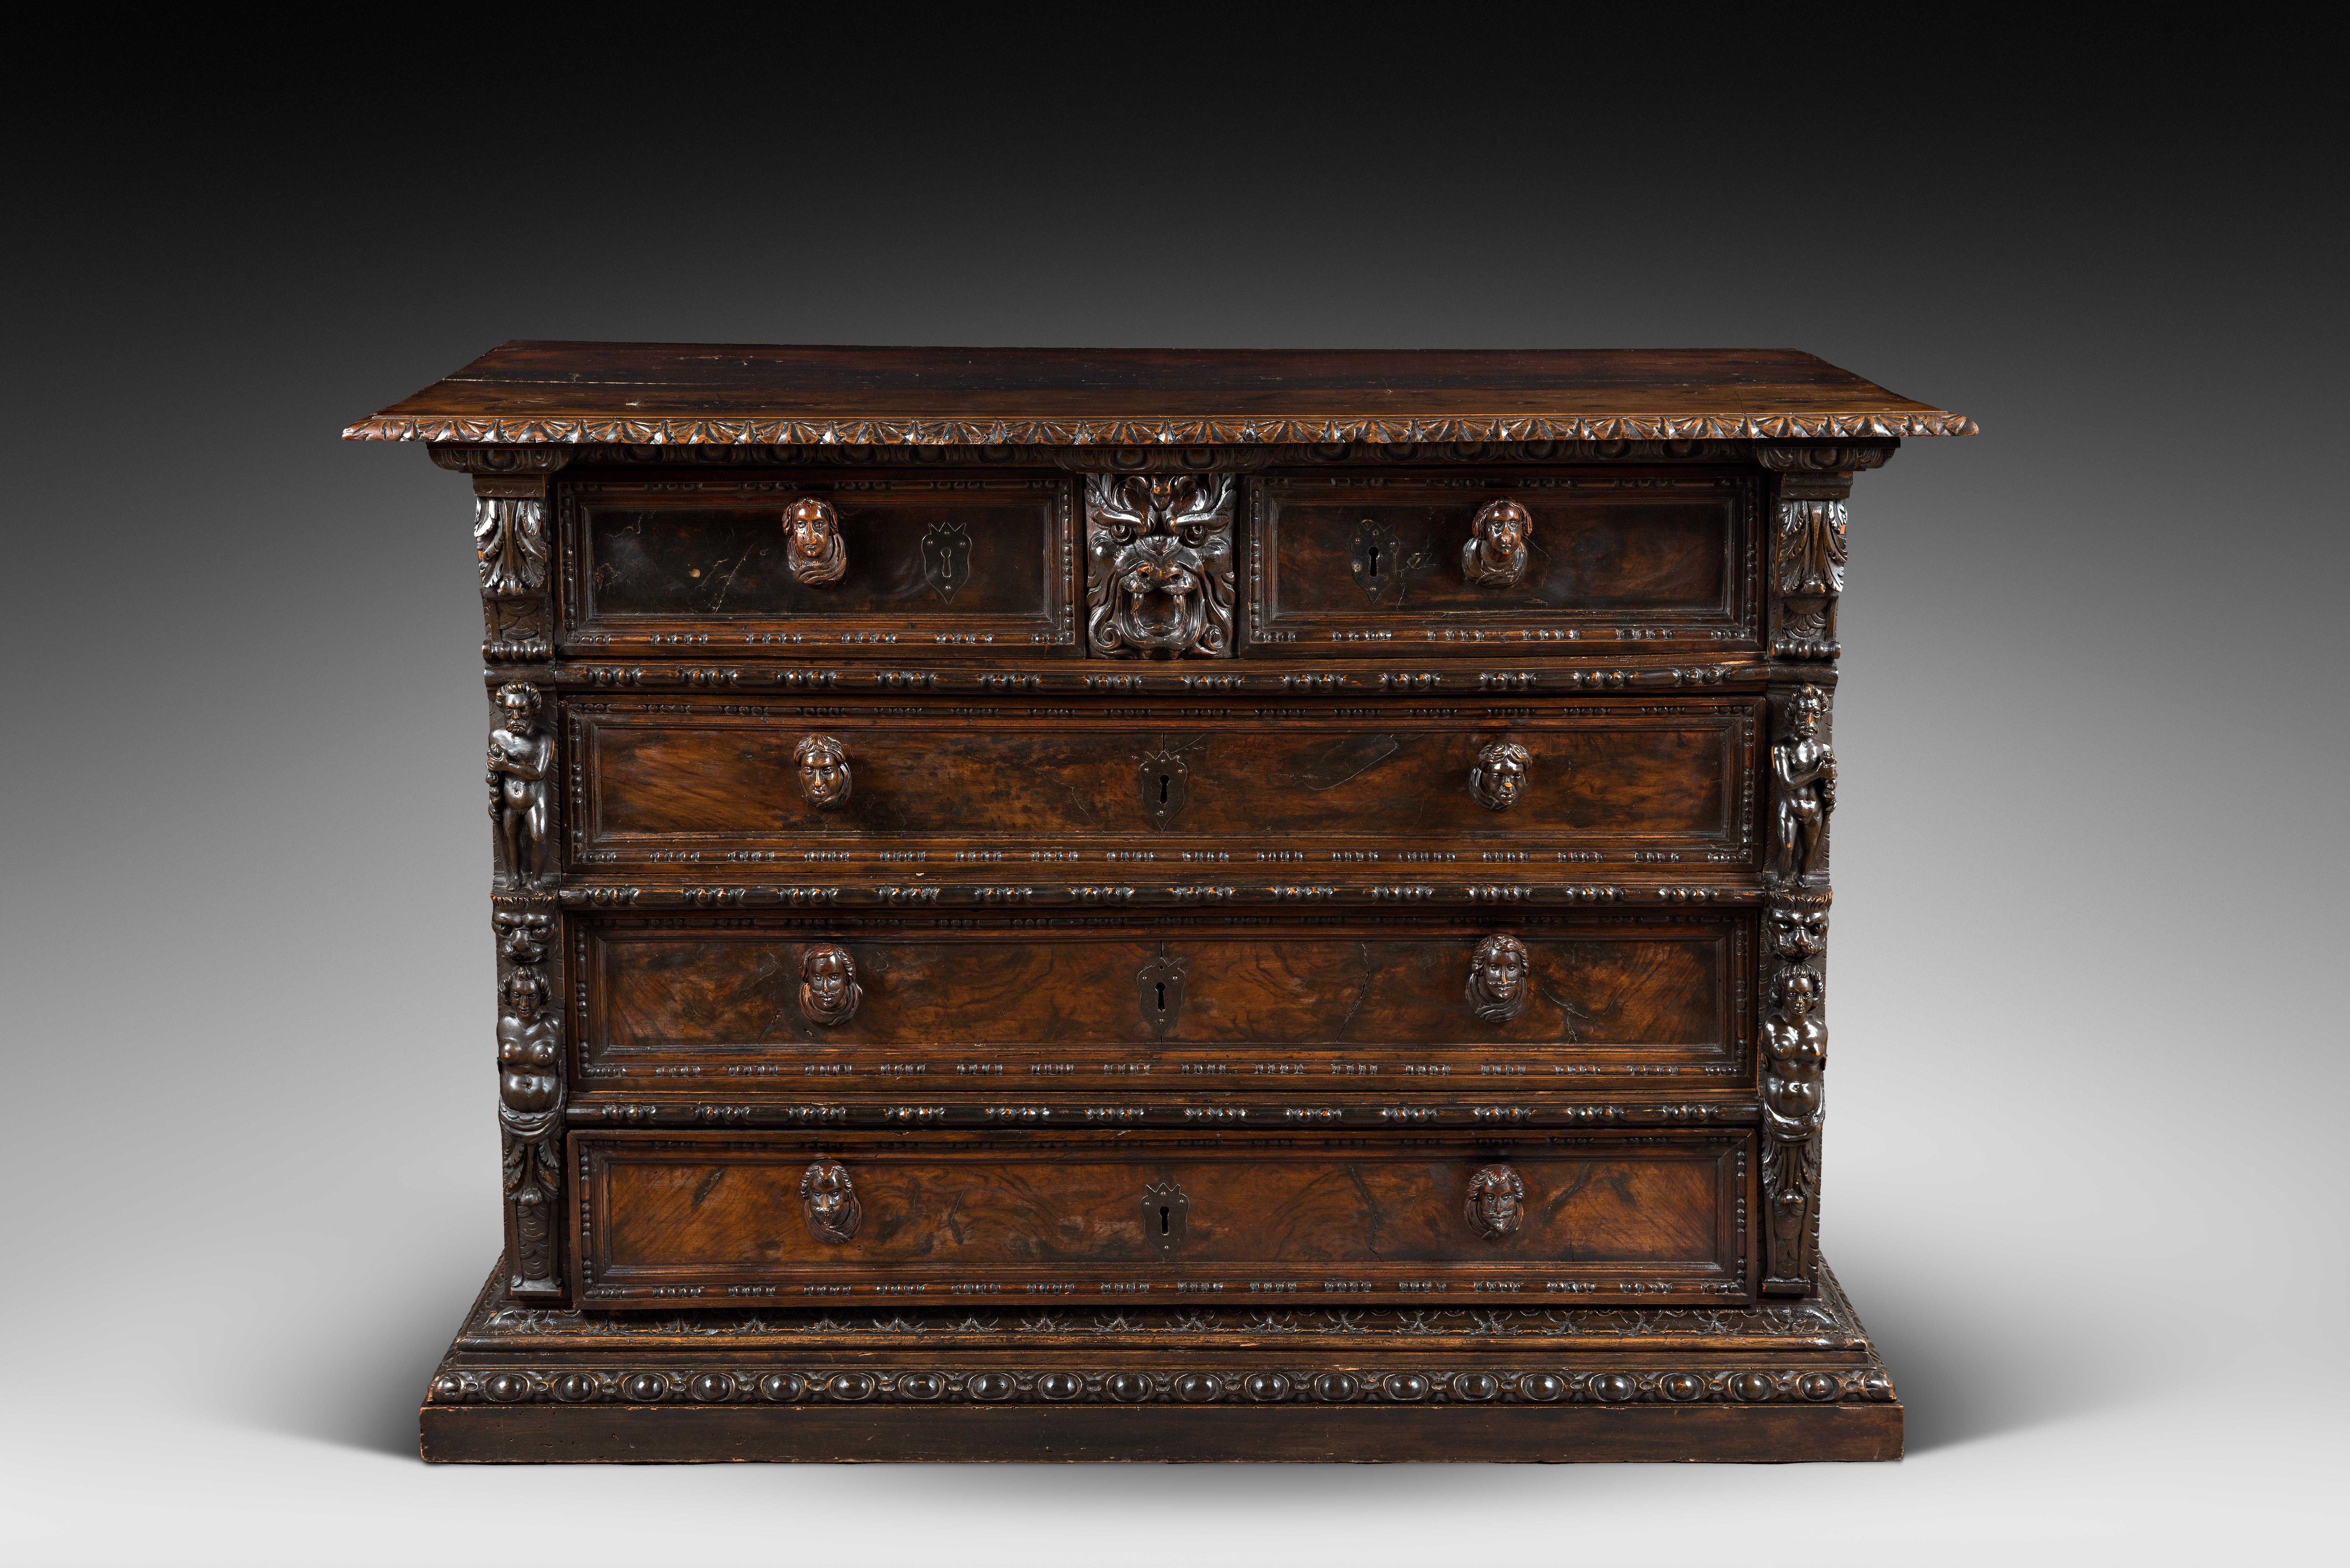 Provenance: Gismondi collection, before 1973. 


Historical Context

This walnut wood and walnut burl cassetone is a remarkable example of Mannerist art applied to furniture in the late 16th century.

While the Mannerist movement appeared and